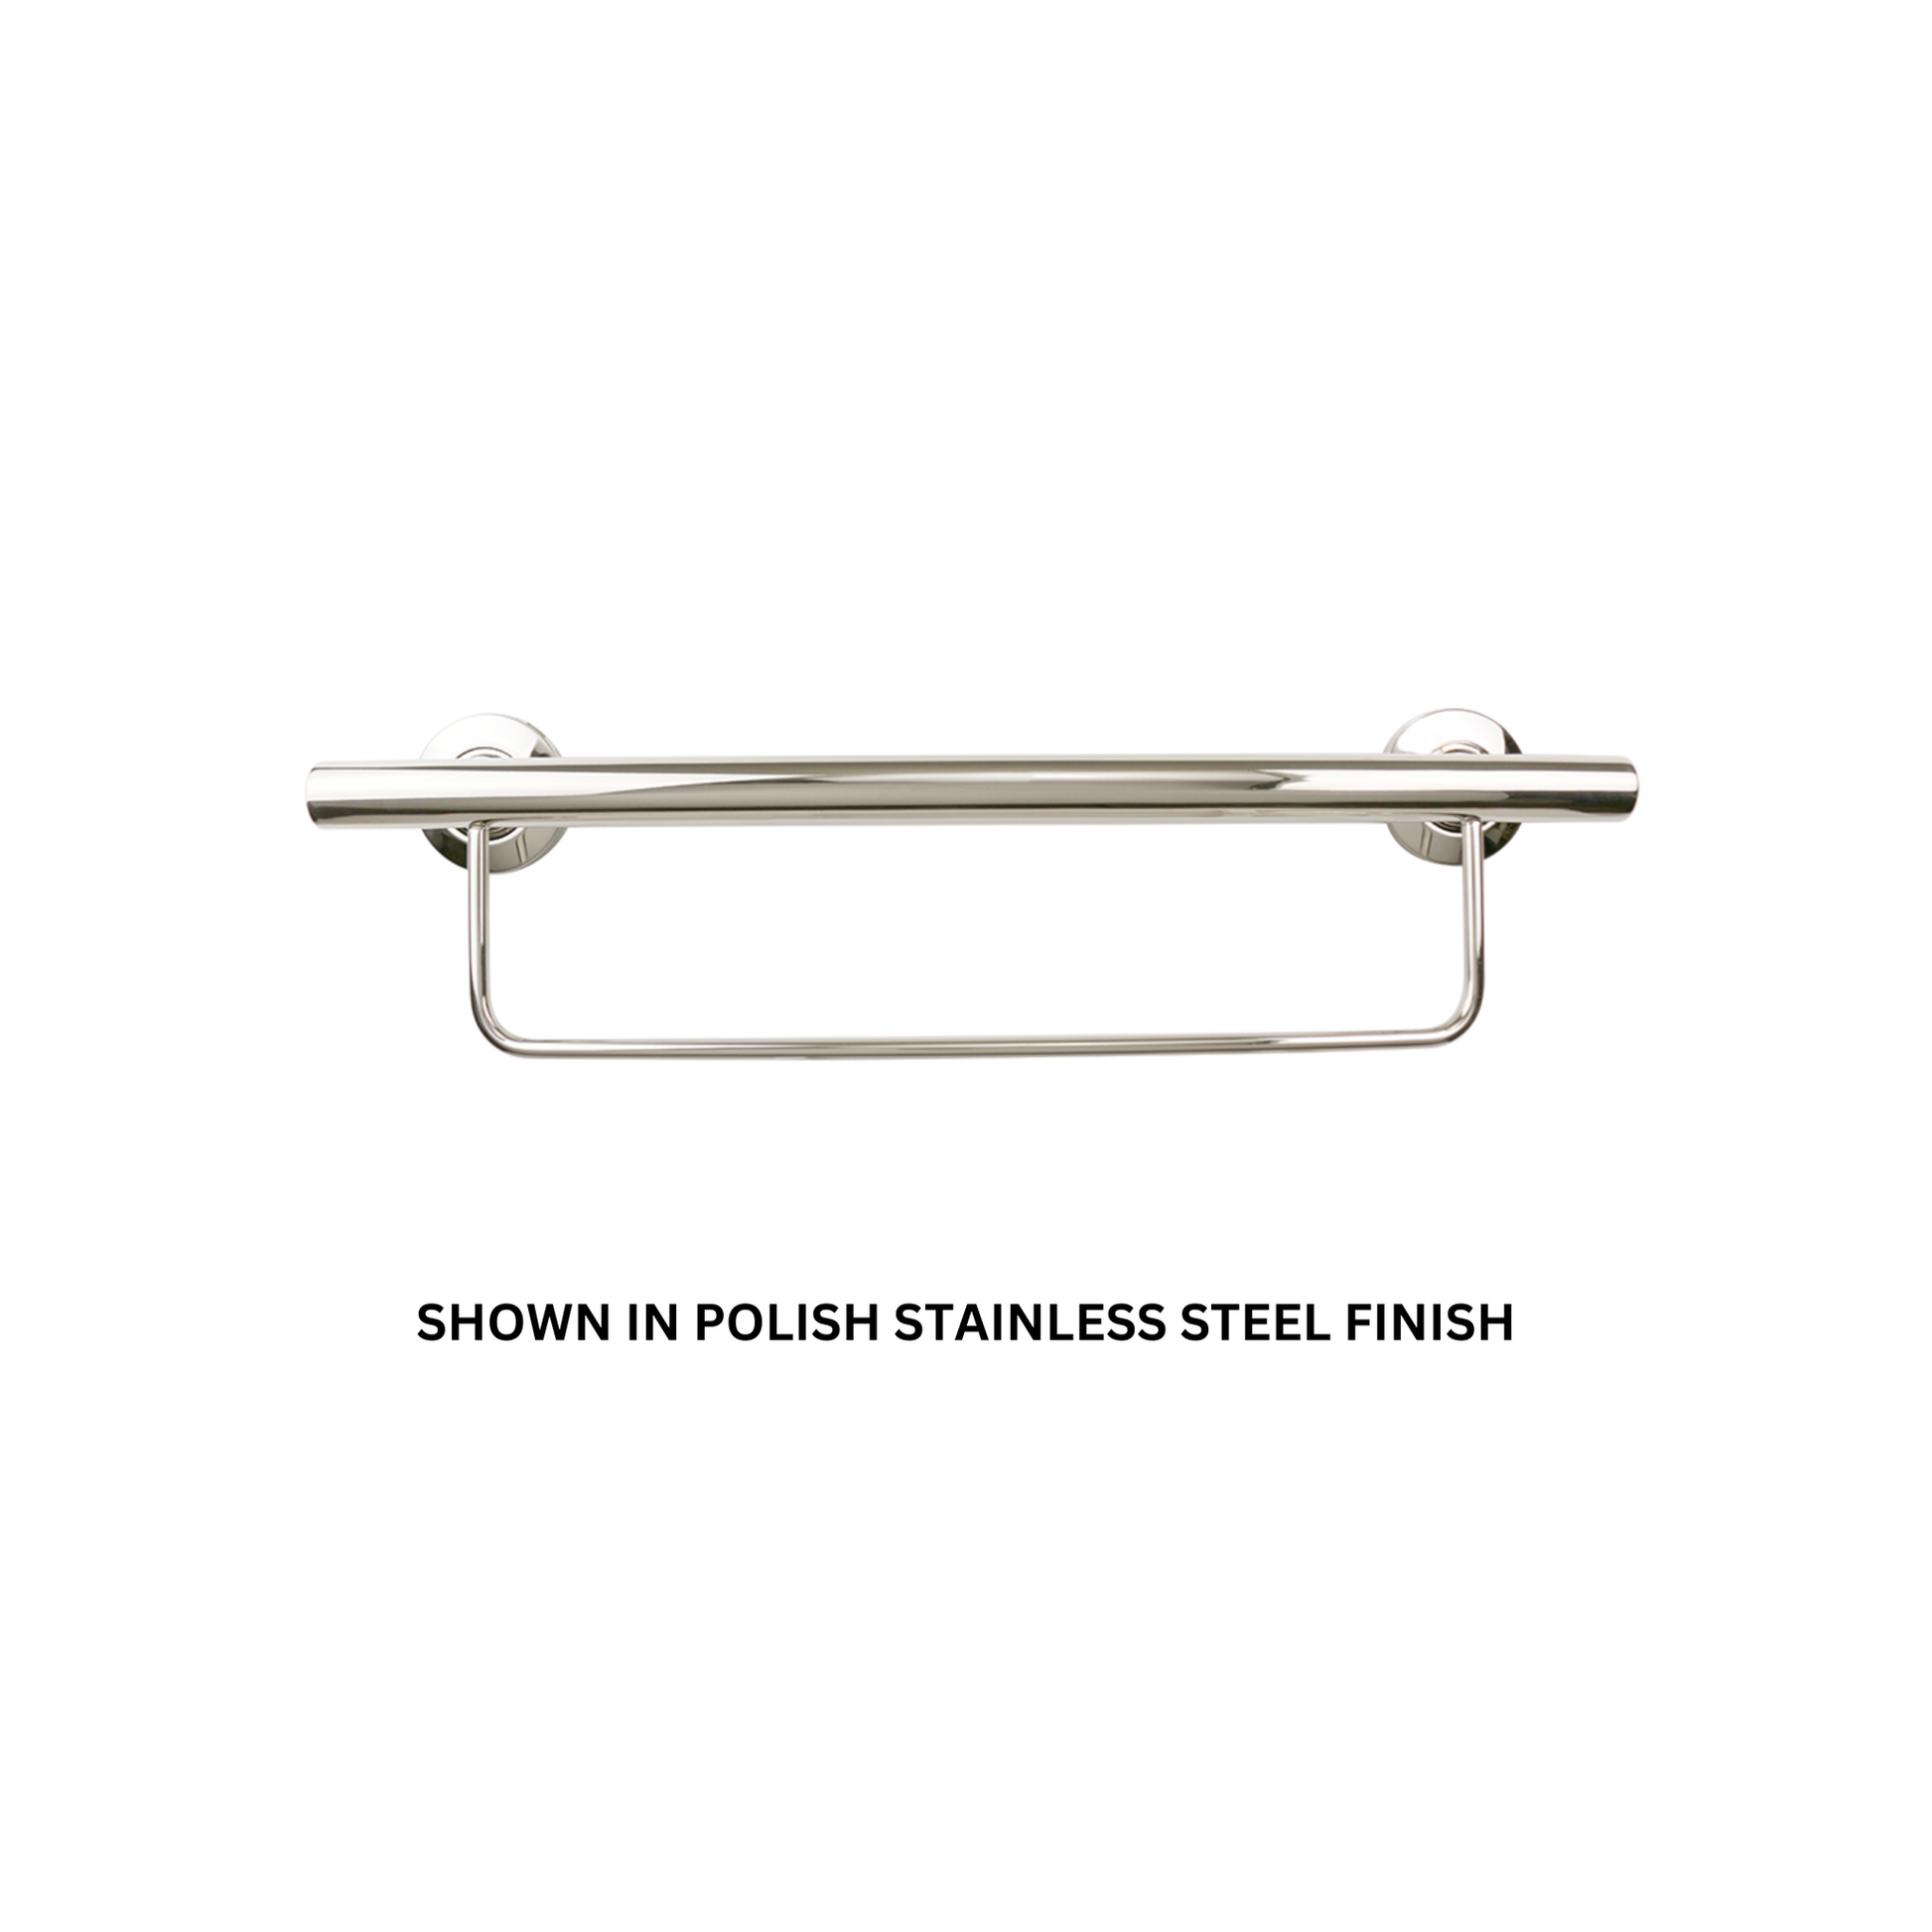 Seachrome Lifestyle & Wellness Series 24" Satin Stainless Steel 1.25 Diameter Concealed Flange Newport Grab Bar With Towel Bar